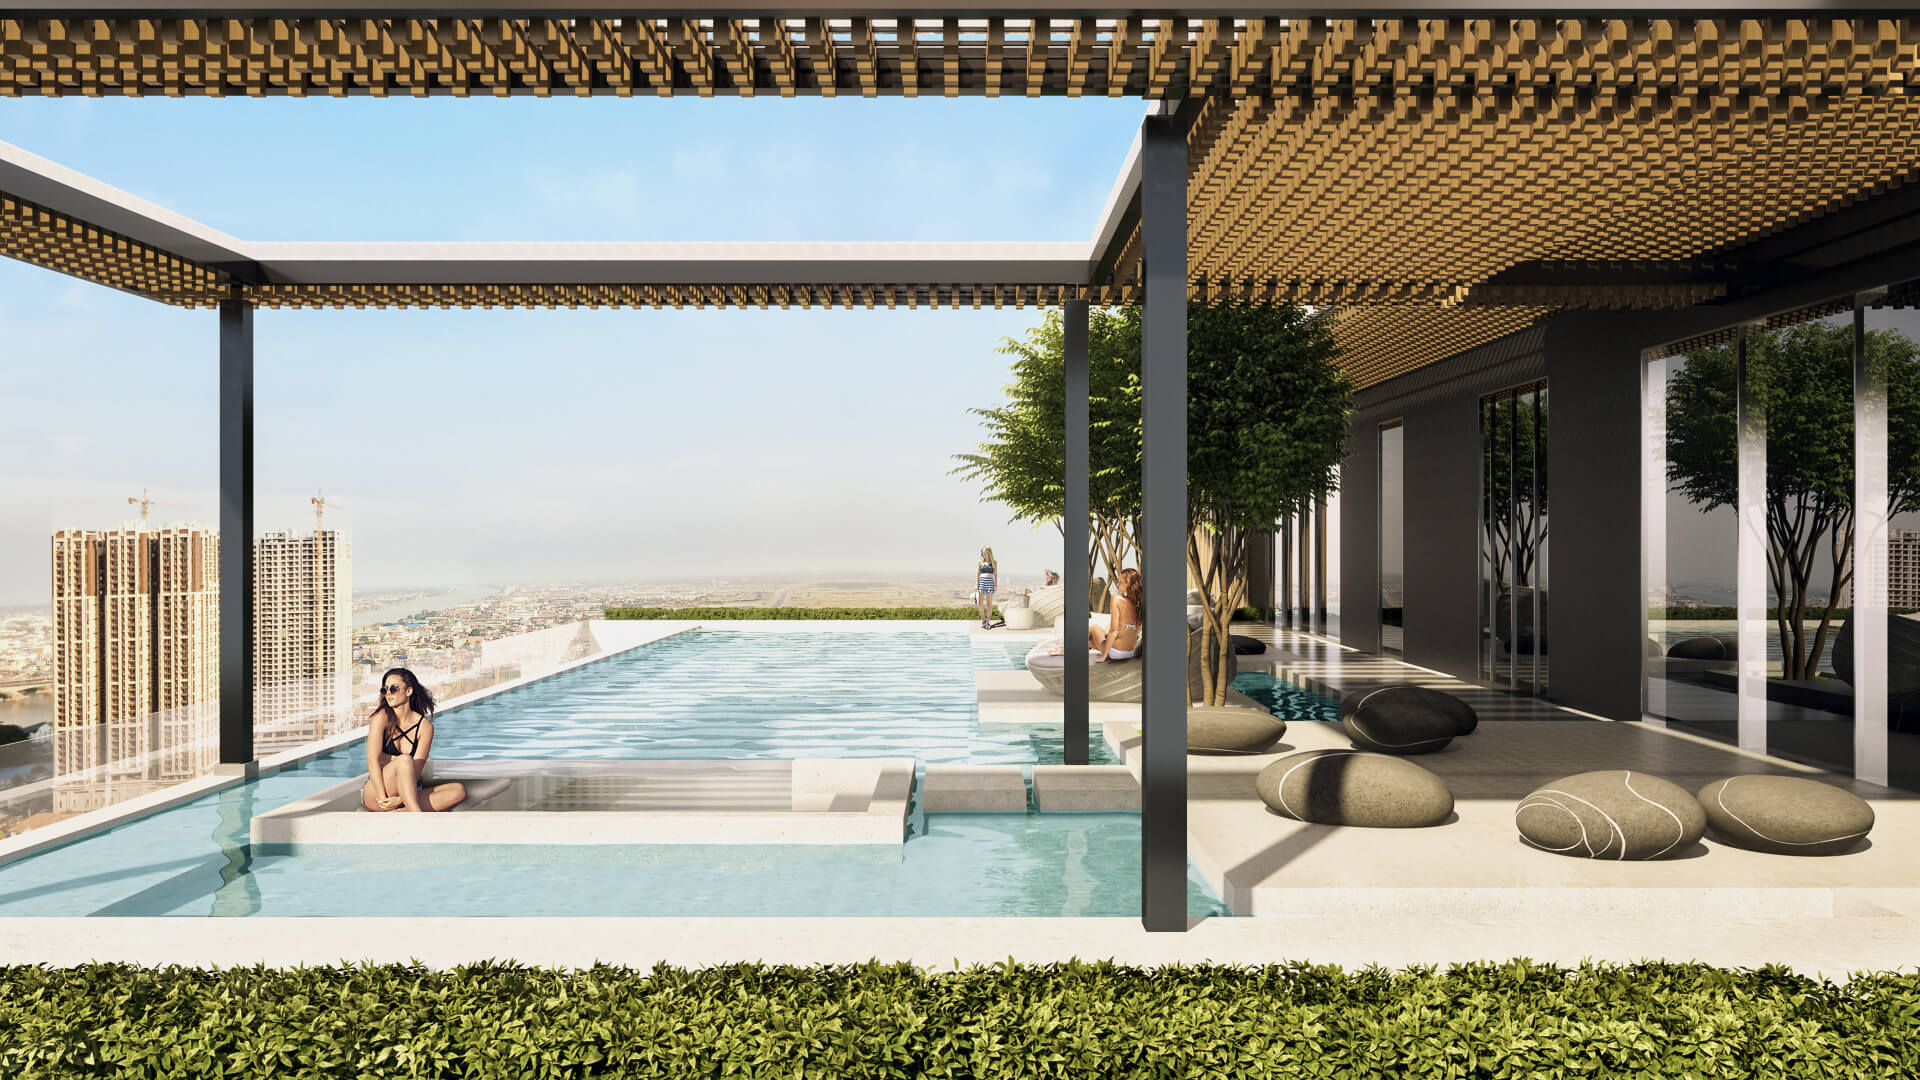 3D Render of a Rooftop Leisure Area with a Pool in a Hotel